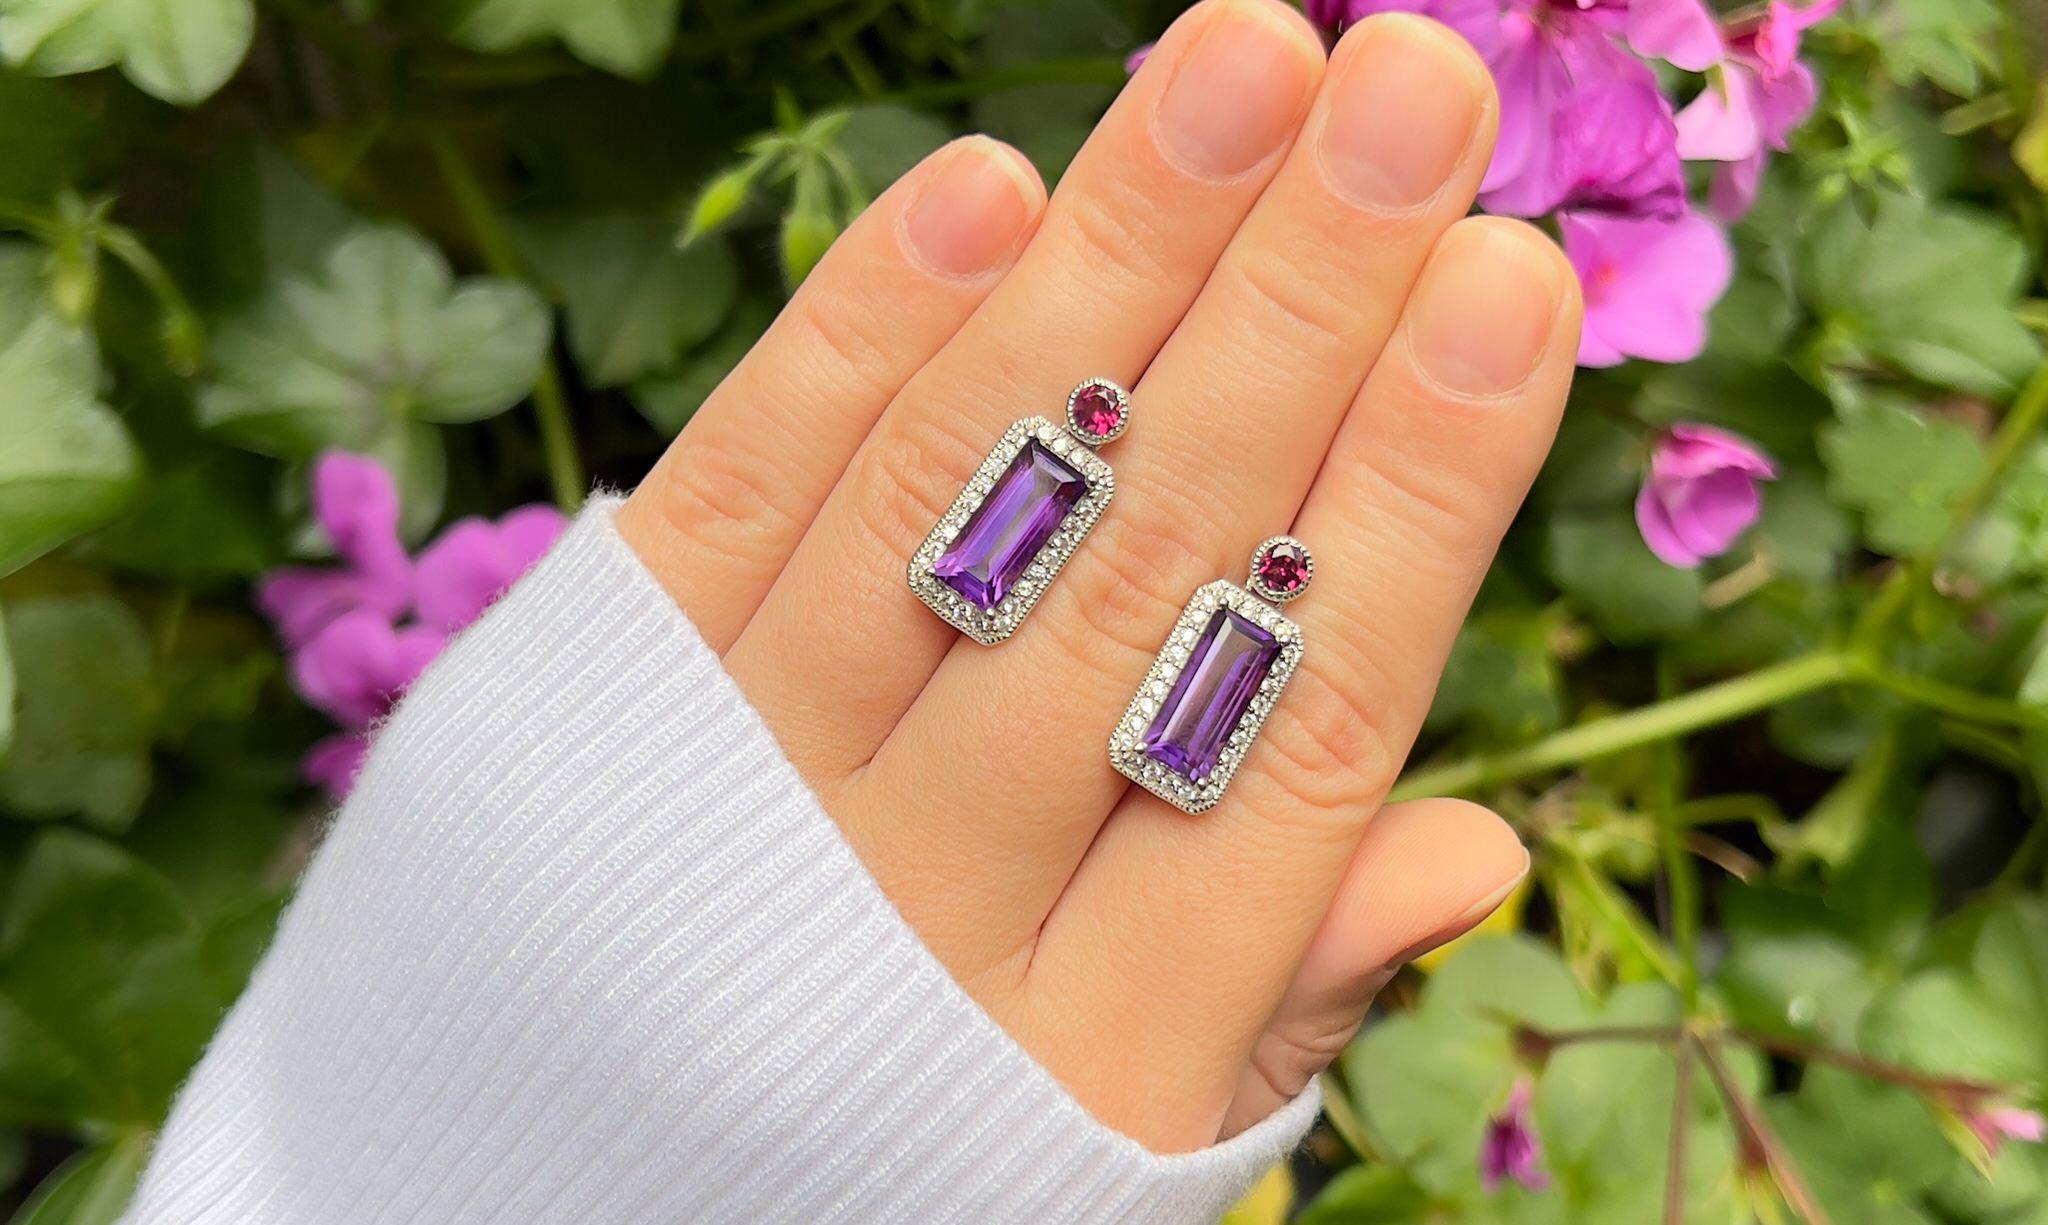 It comes with the appraisal by GIA GG/AJP  
Amethyst = 5.60 Carats ( 14 x 6 mm )
Cut: Baguette
Total Quantity of Amethyst: 2
Primary Stone Color: Purple
Rhodolite Garnet = 0.60 Carats
White Topaz: 0.80 Carats
Metal: Sterling Silver
Back Finding: